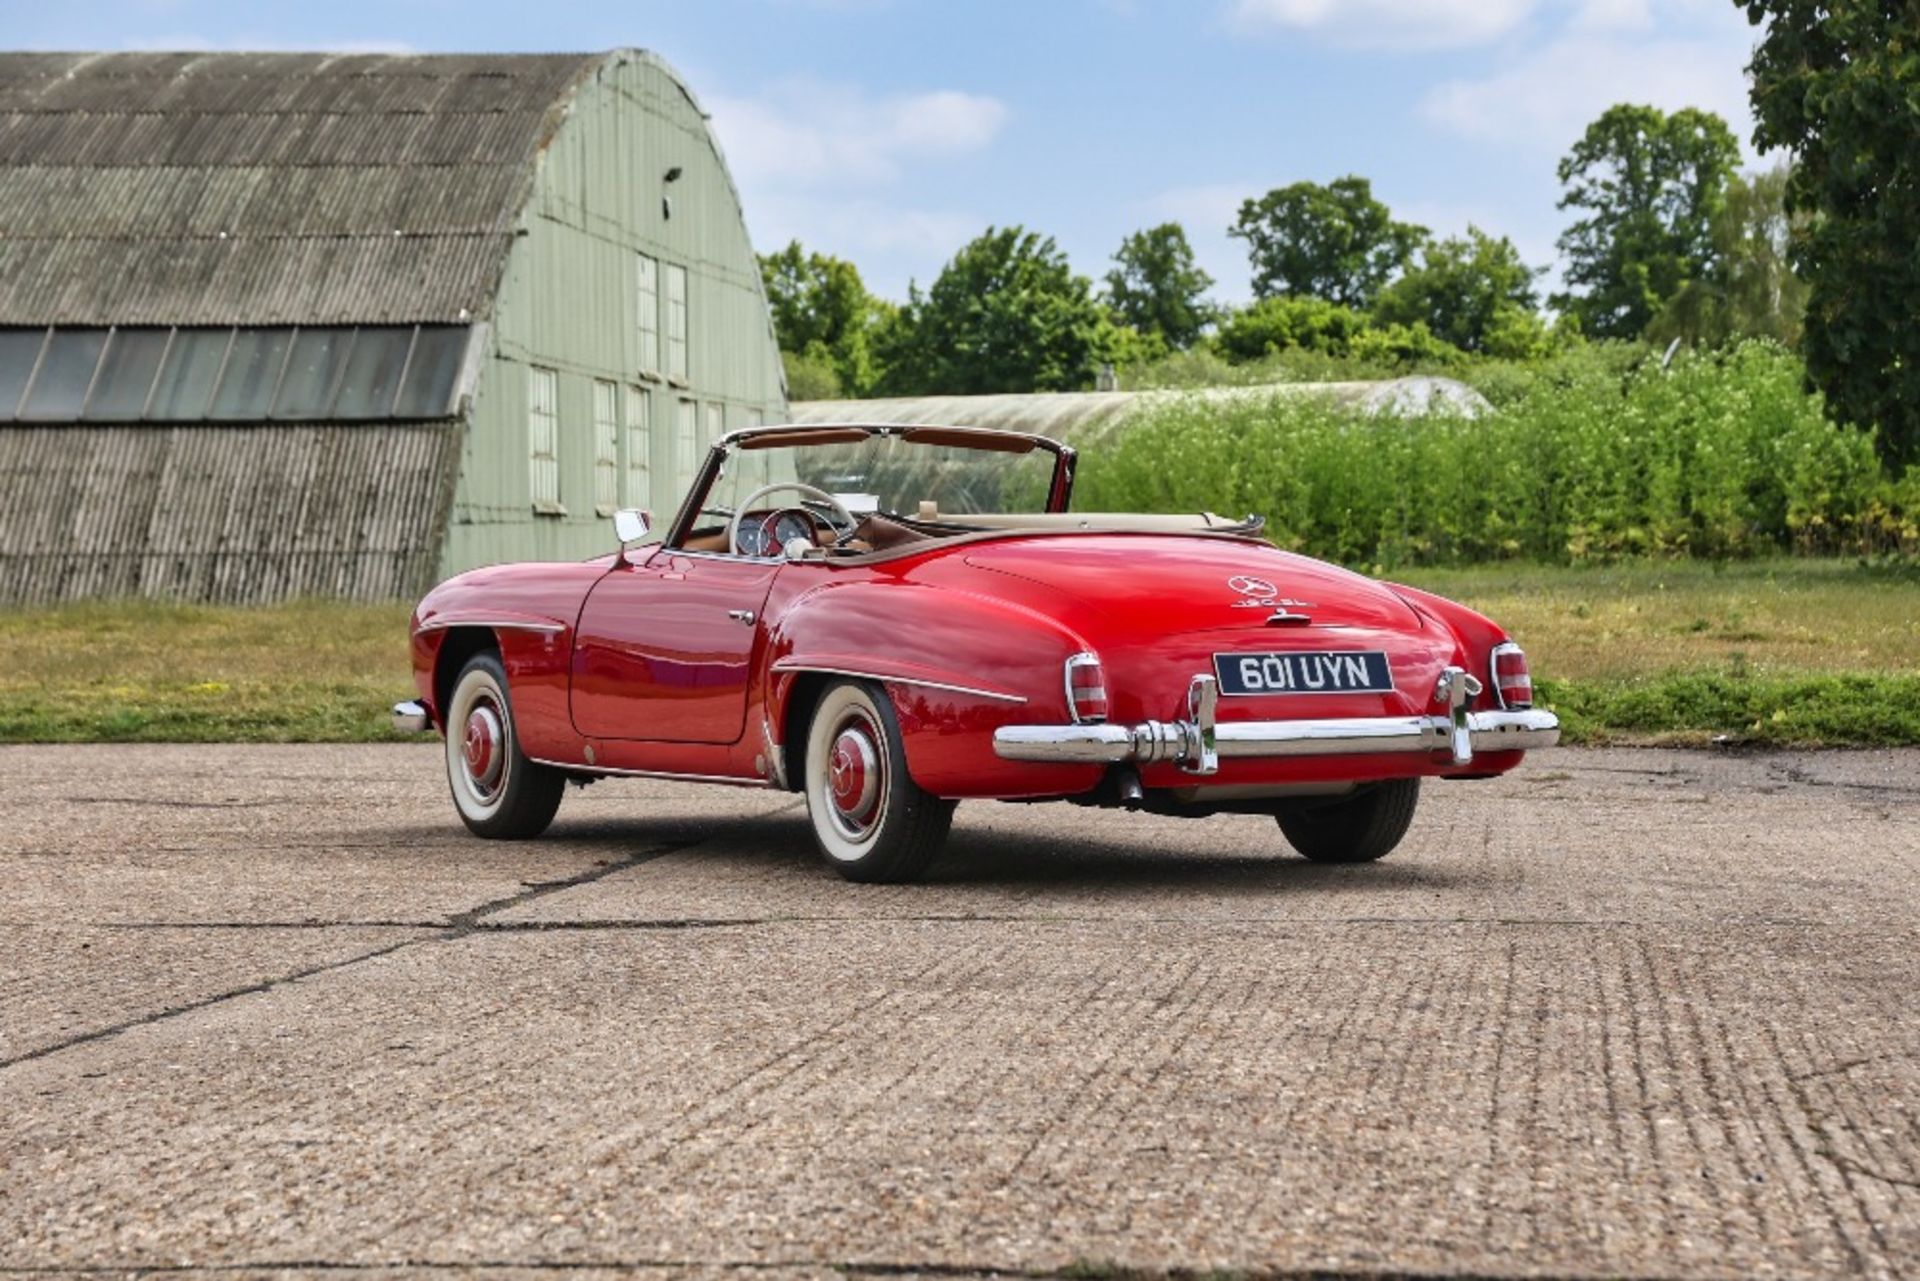 1958 MERCEDES-BENZ 190SL Registration Number: 601 UYN Chassis Number: 121.040.8500635 Recorded - Image 22 of 23